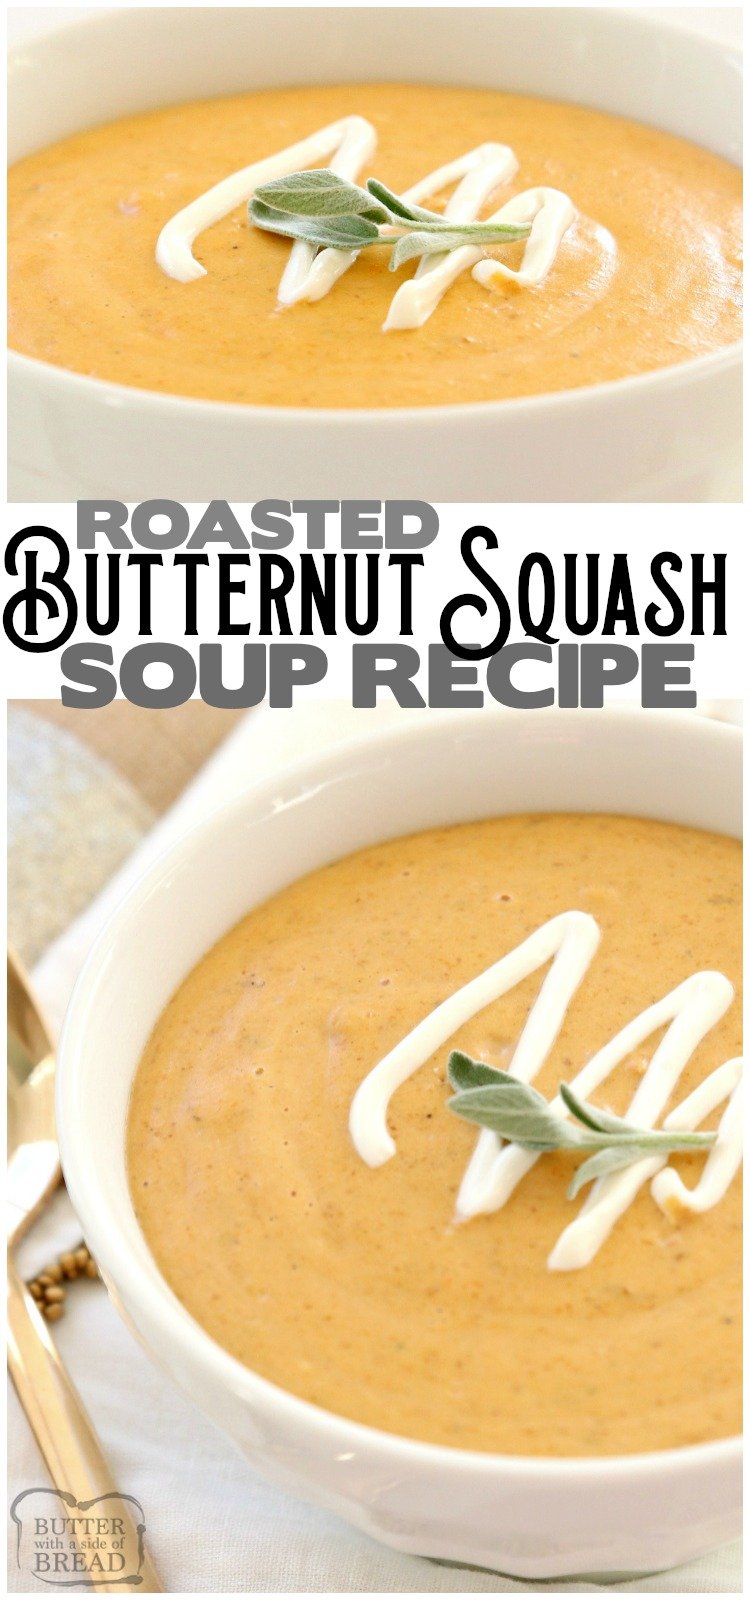 Roasted Butternut Squash Soup made easy in 30 minutes! Creamy, flavorful and healthy butternut squash soup recipe perfect for healthy dinners and lunches. #butternut #squash #soup #recipe #food #healthy #dinner #meatless #lowcal from BUTTER WITH A SIDE OF BREAD